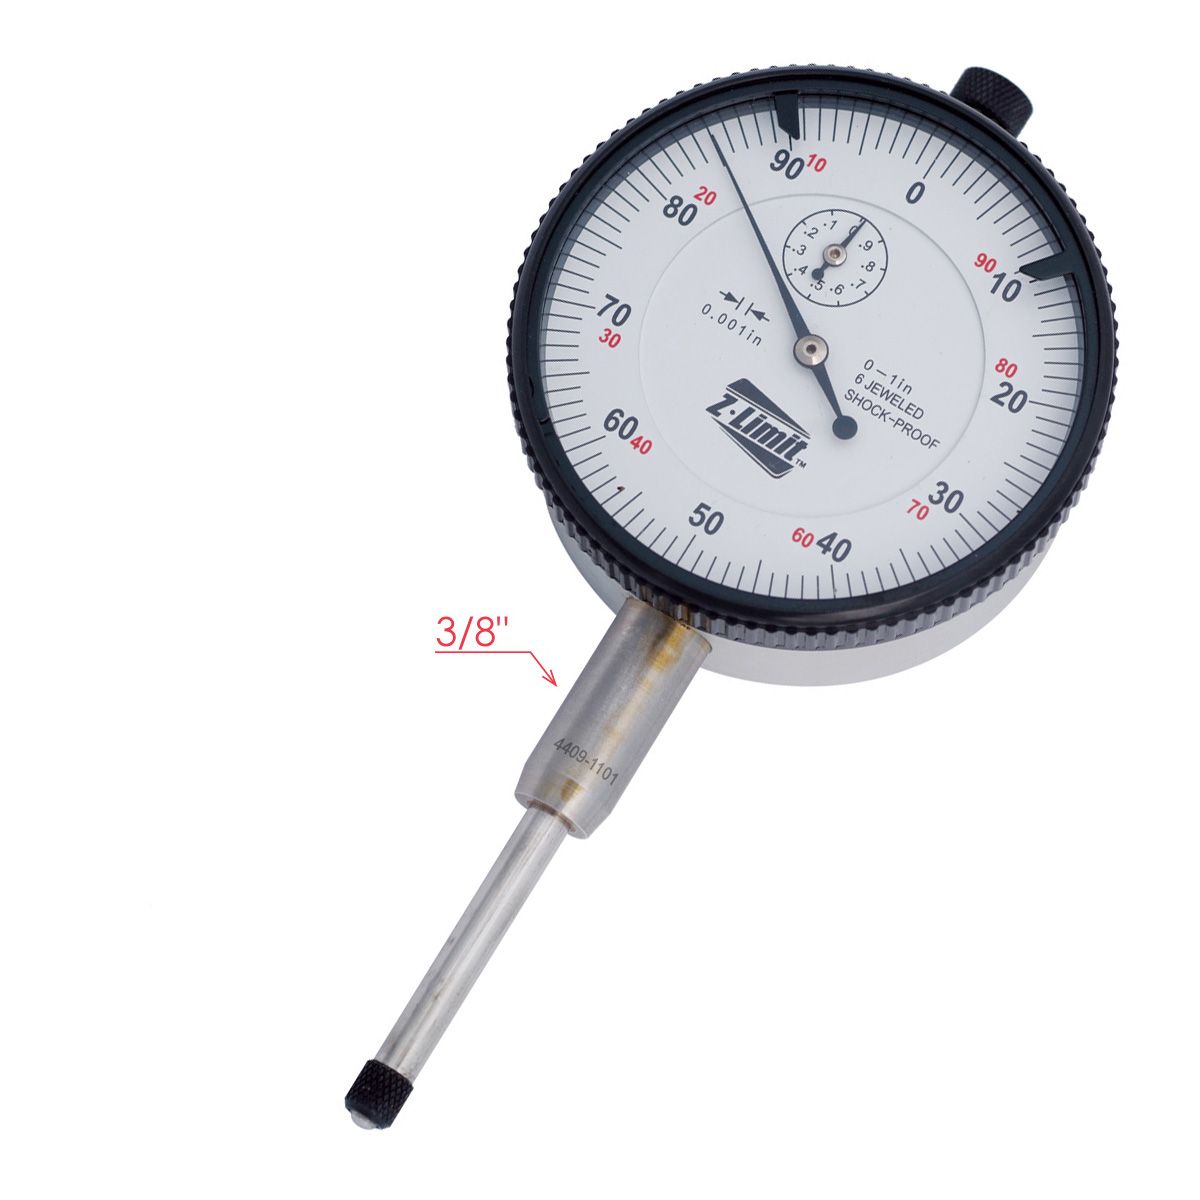 Z-LIMIT 0-1" SHOCK-PROOF DIAL INDICATOR (4409-1101)